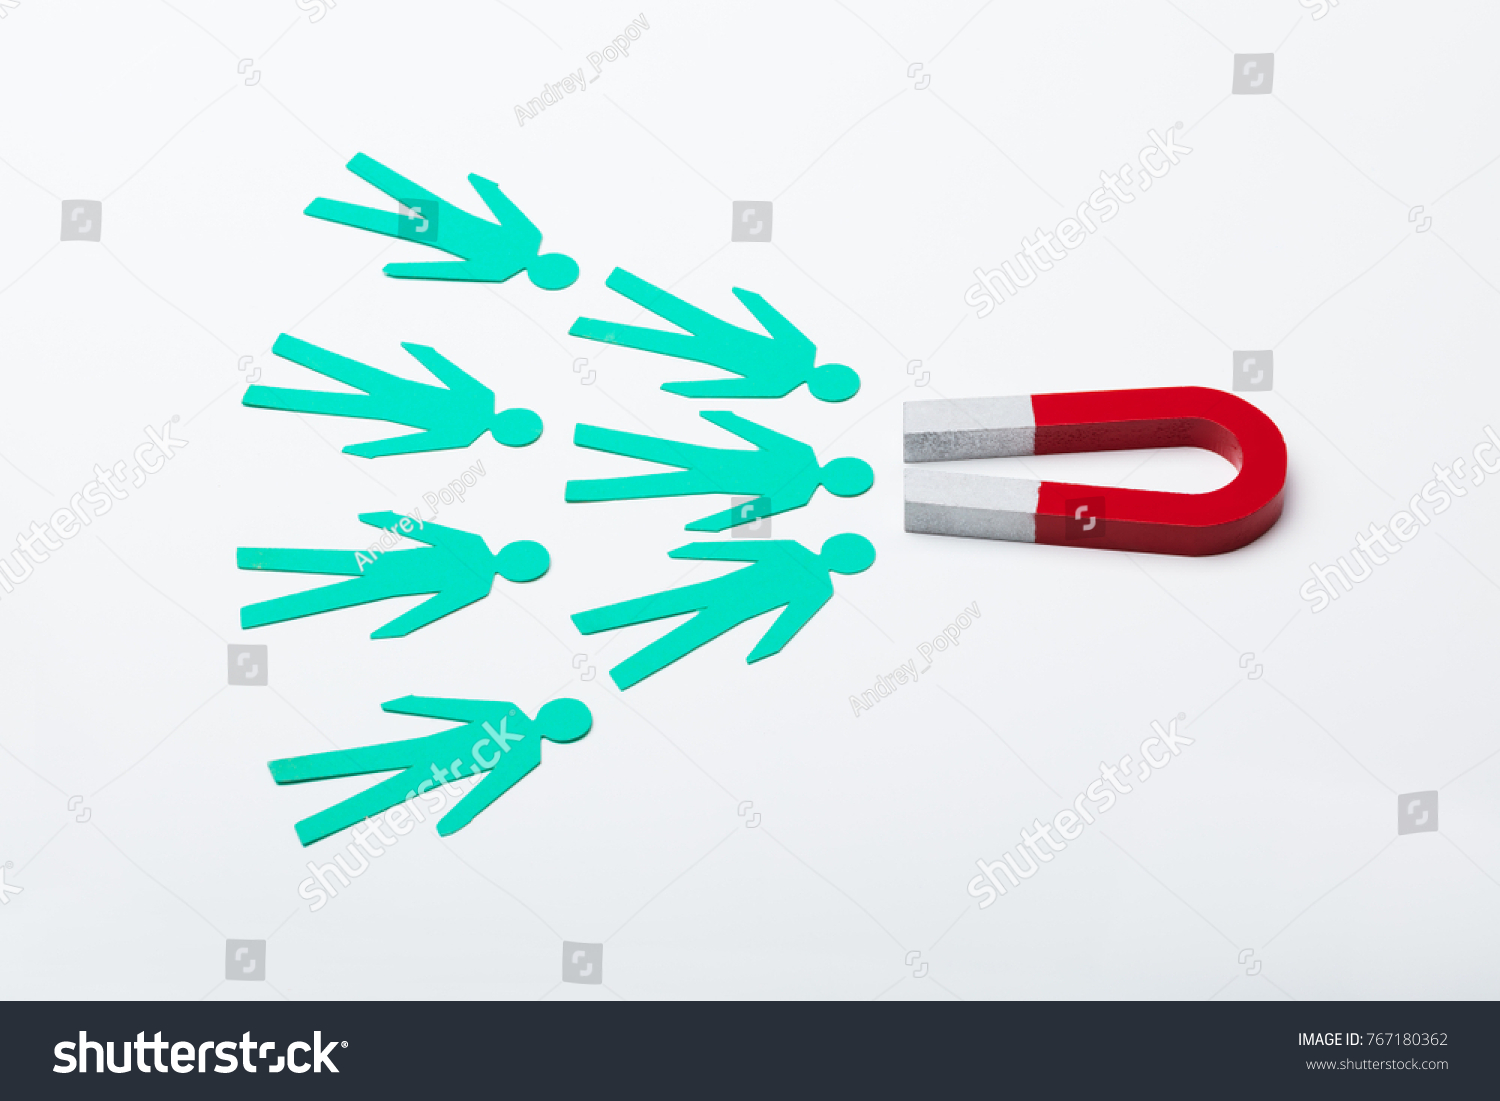 High Angle View Of A Red Horseshoe Magnet Attracting Paper Cut Out On White Background #767180362